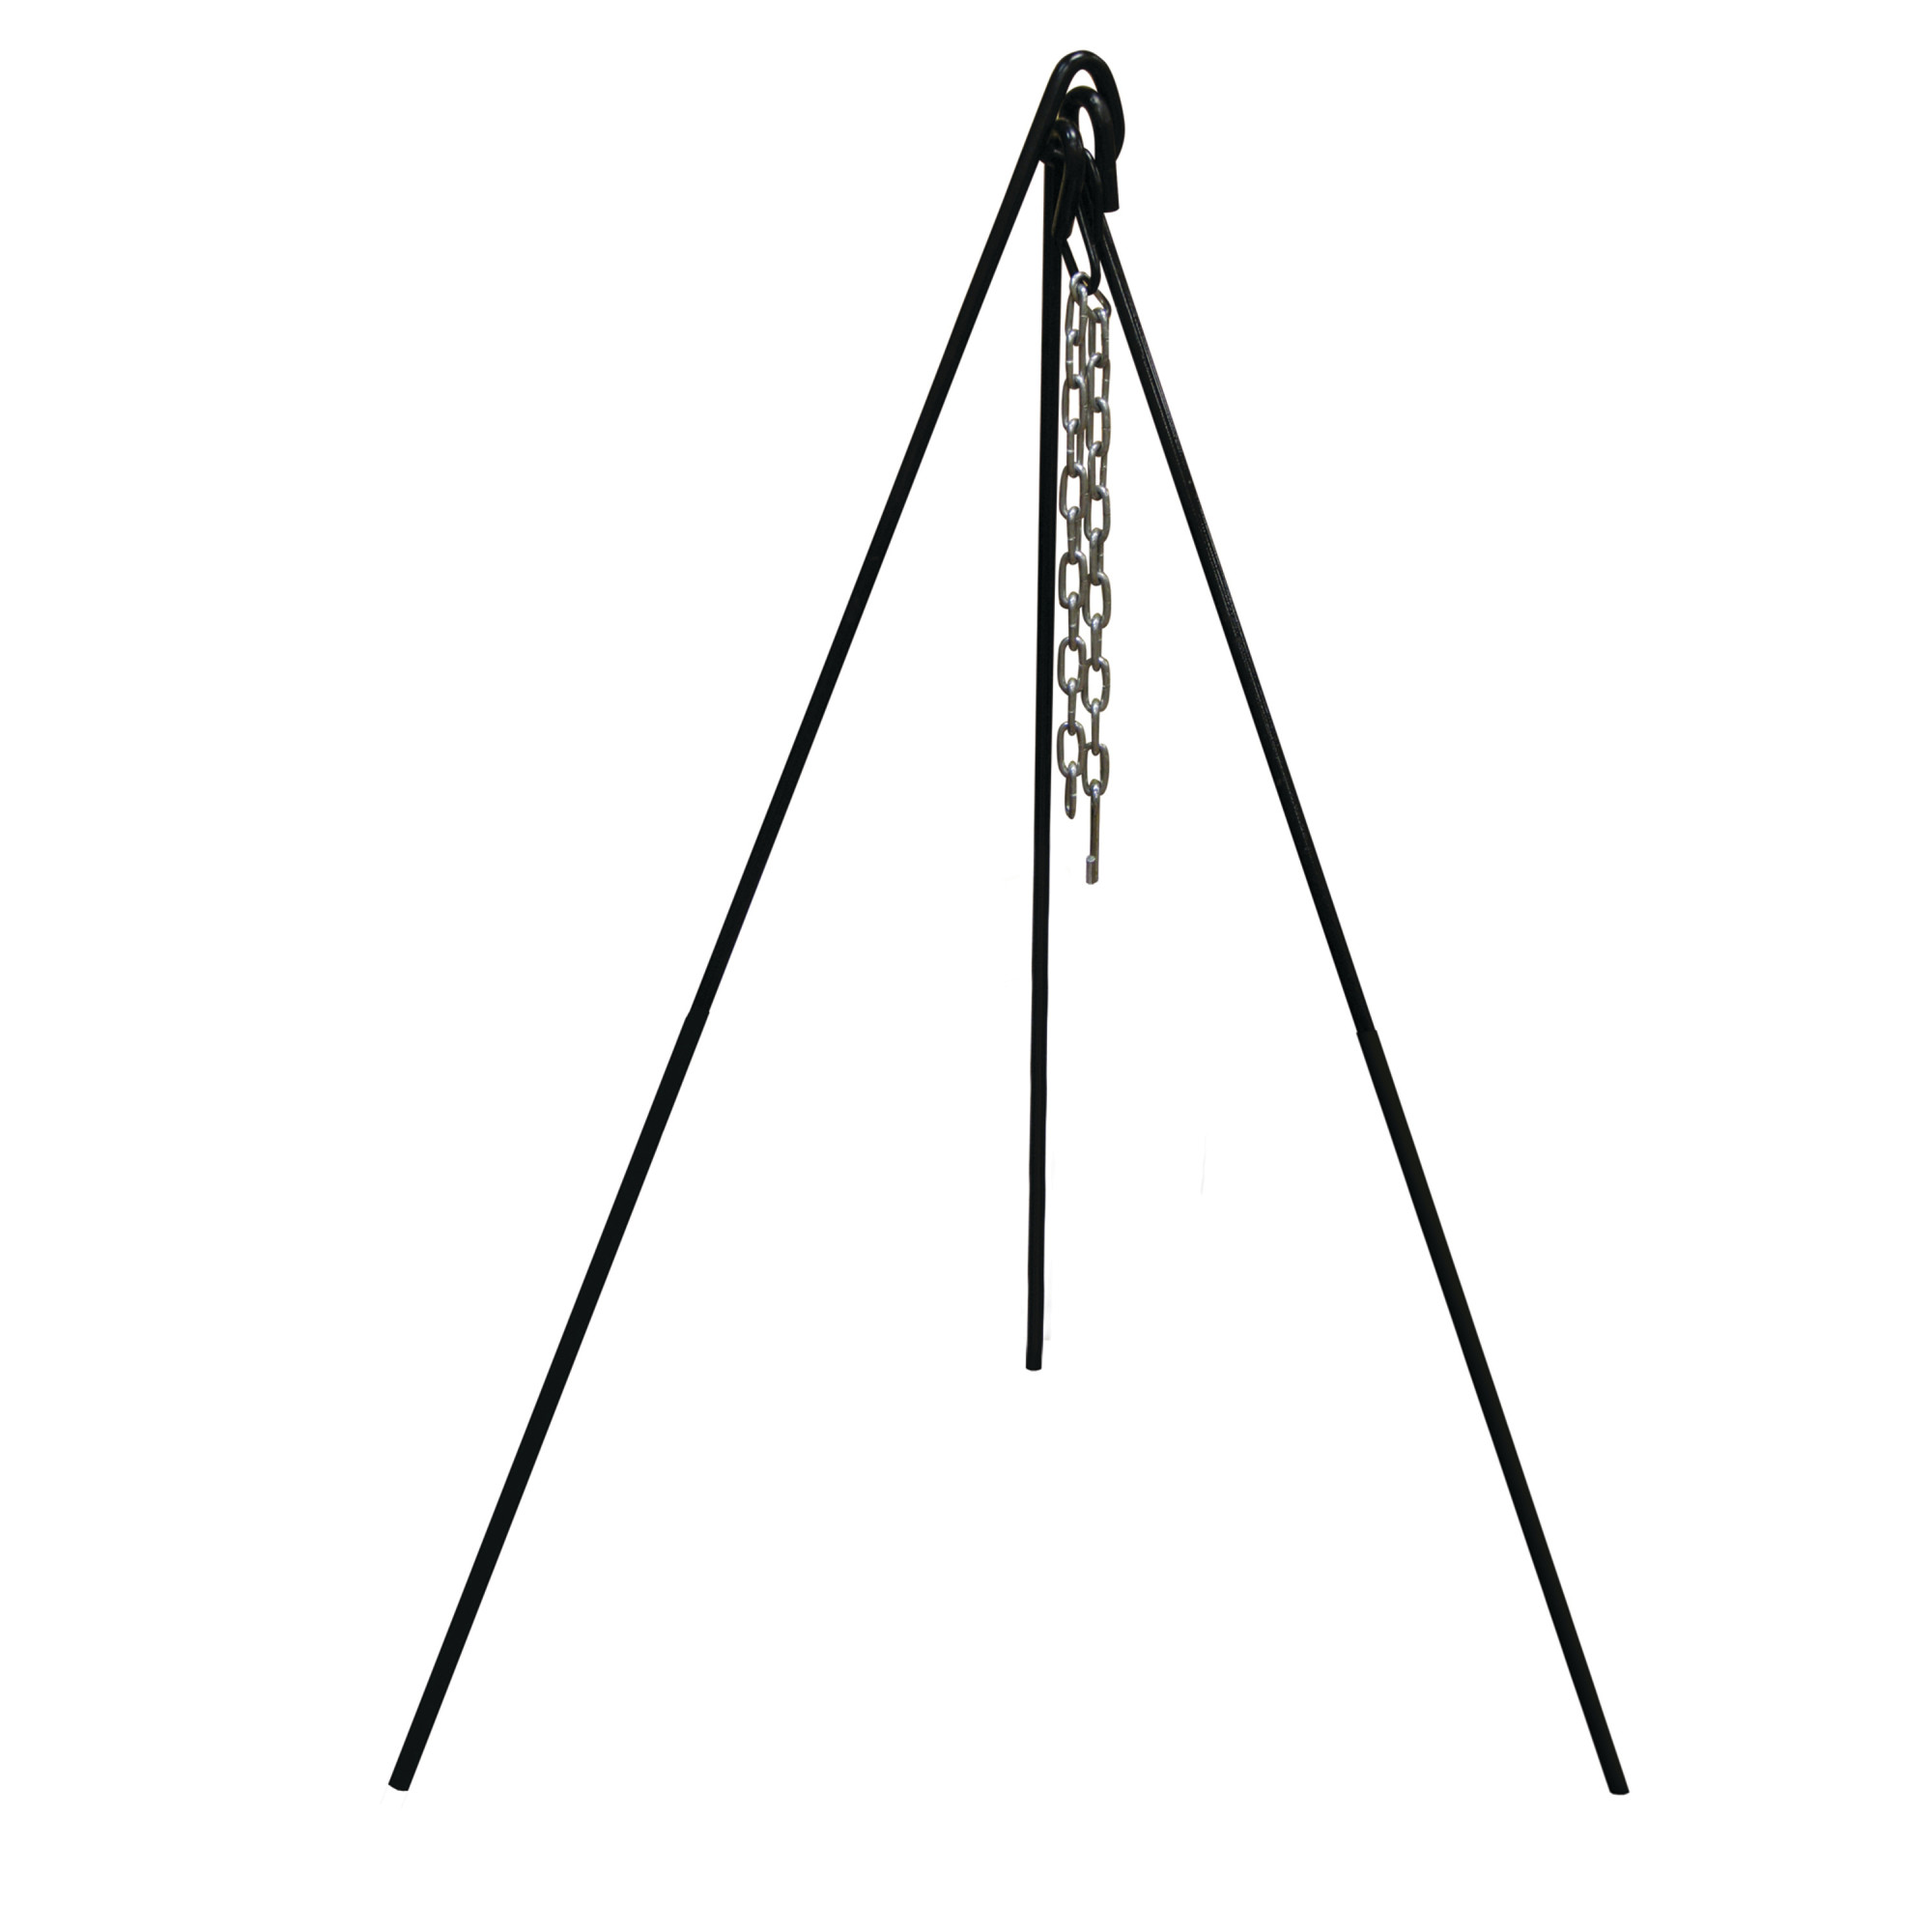 Stansport Heavy-Duty Steel Cooking Tripod Charcoal Wood Campfire Model 15997 - image 1 of 4